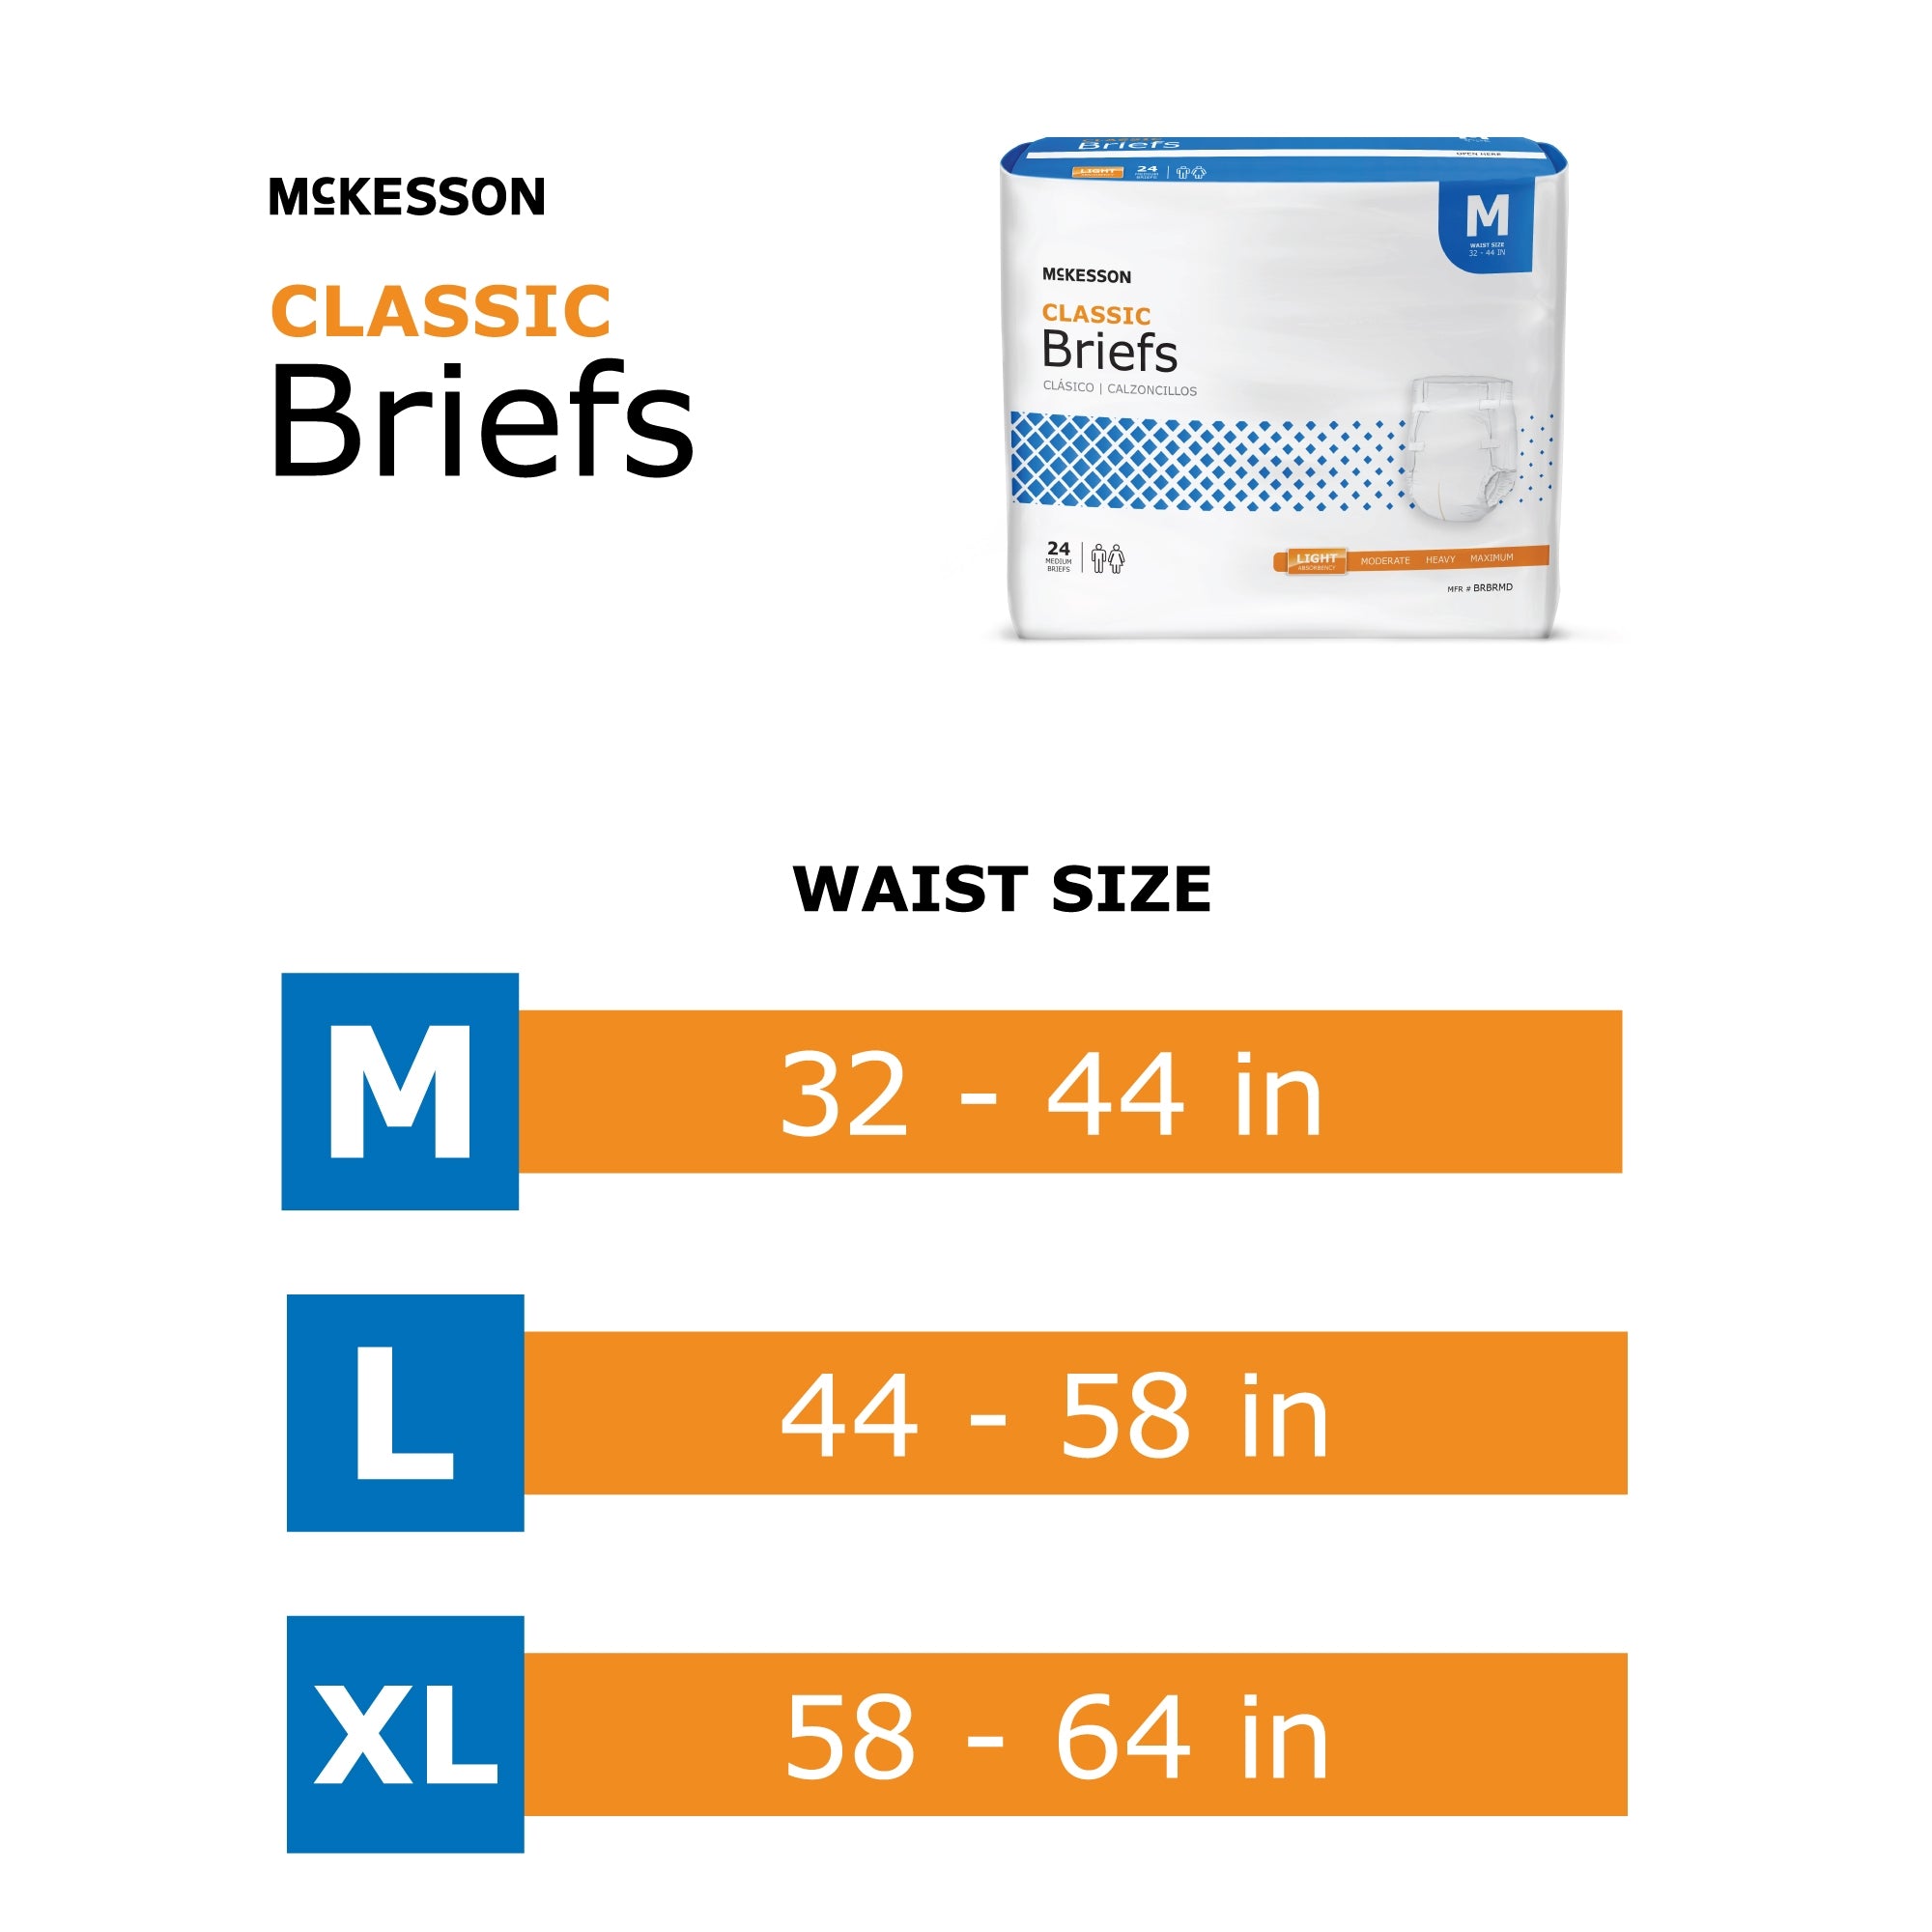 McKesson Classic Large Incontinence Briefs, Light Absorbency - 72 Pack